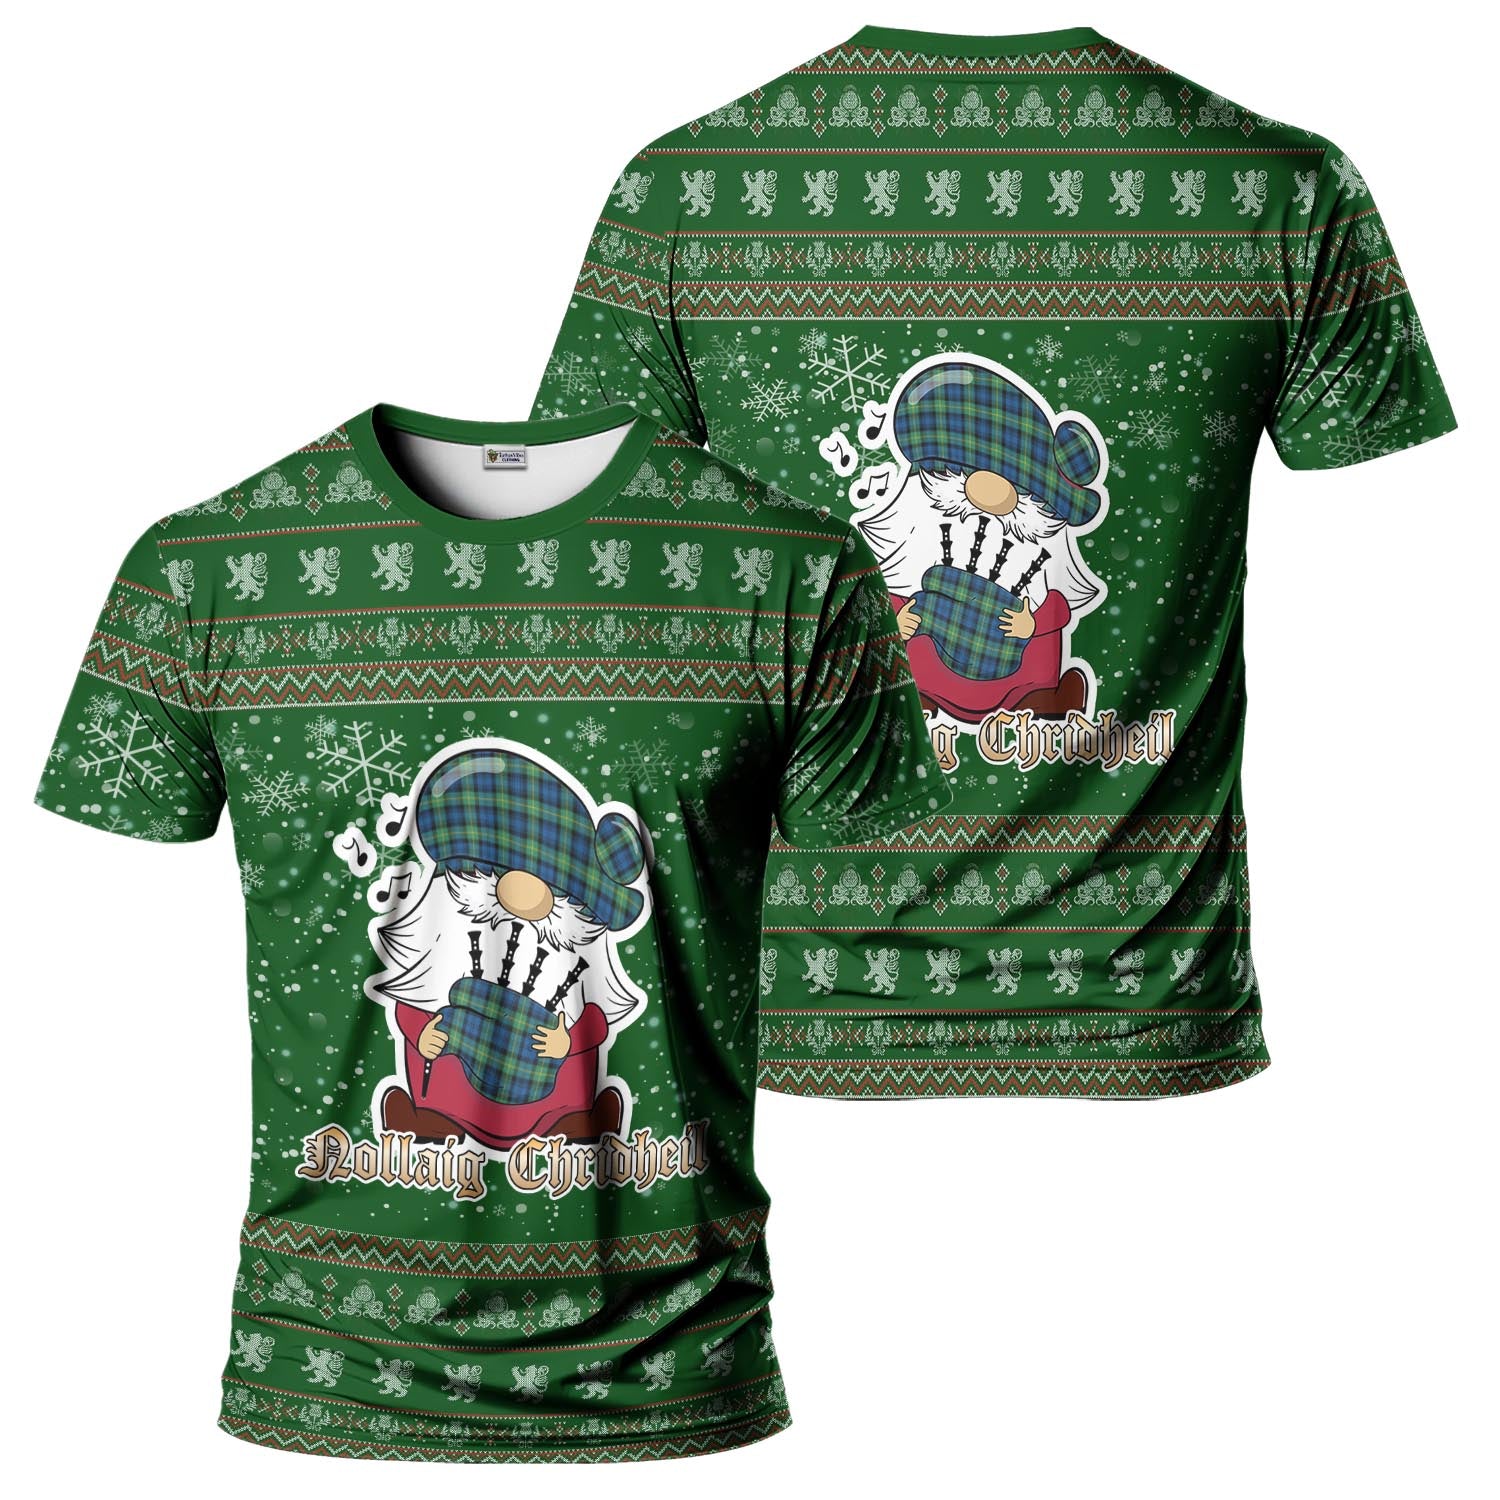 Gordon Ancient Clan Christmas Family T-Shirt with Funny Gnome Playing Bagpipes Men's Shirt Green - Tartanvibesclothing